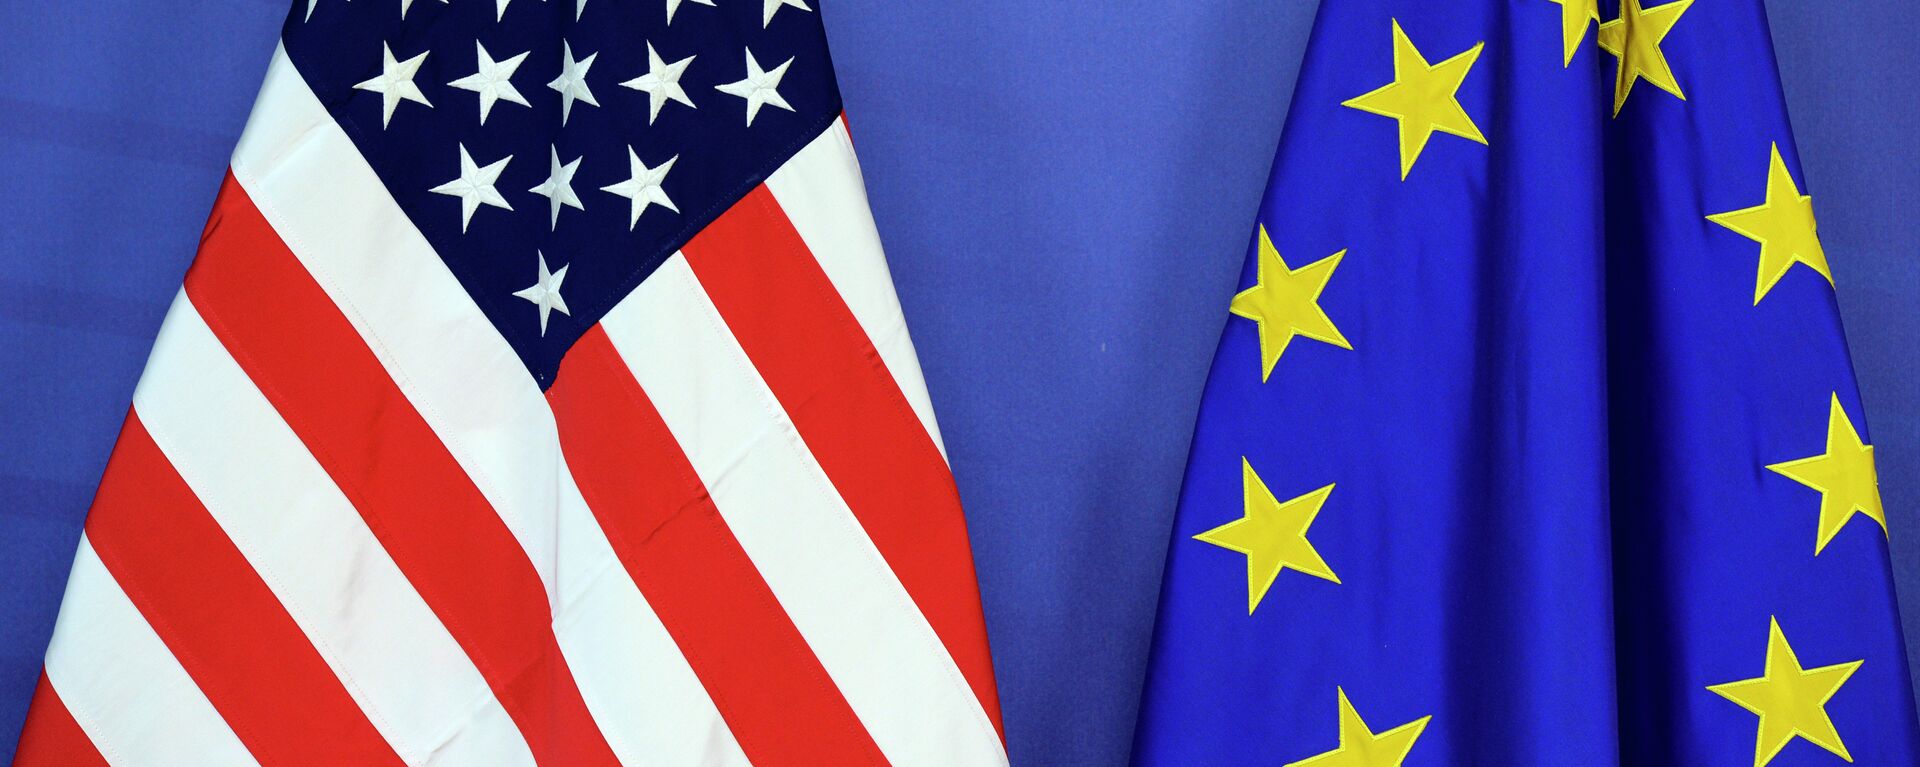 The US national flag (L) and the flag of the European Union are placed side-by-side during the Transatlantic Trade and Investment Partnership (TTIP) meeting at the European Union Commission headquarter in Brussels, on July 13, 2015 - Sputnik Mundo, 1920, 07.12.2020